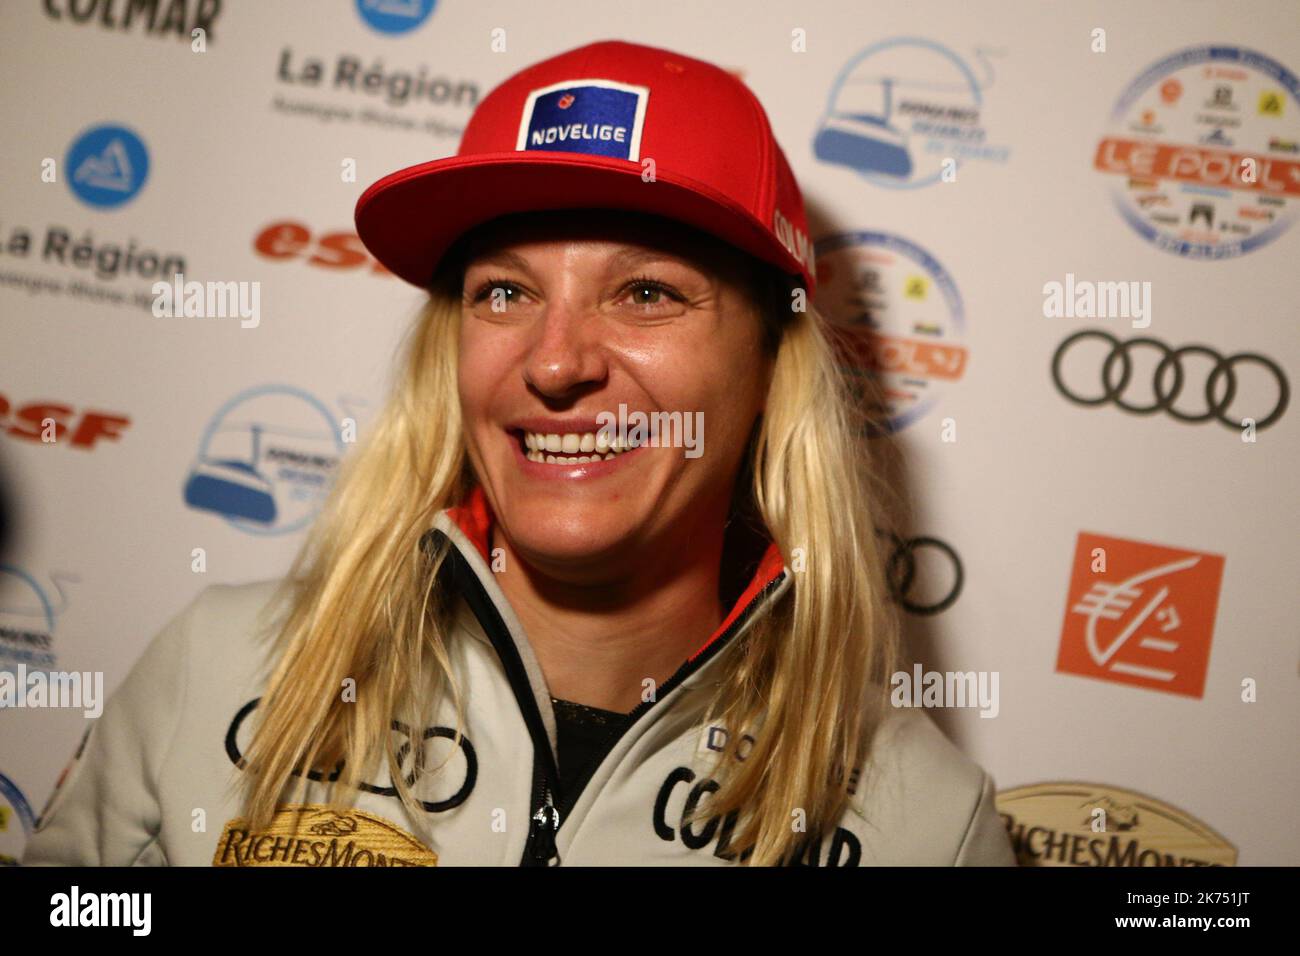 Jennifer Piot attends a press conference 2 days before the Opening of the Alpine Ski World Cup in Solden on October 26, 2017 Stock Photo